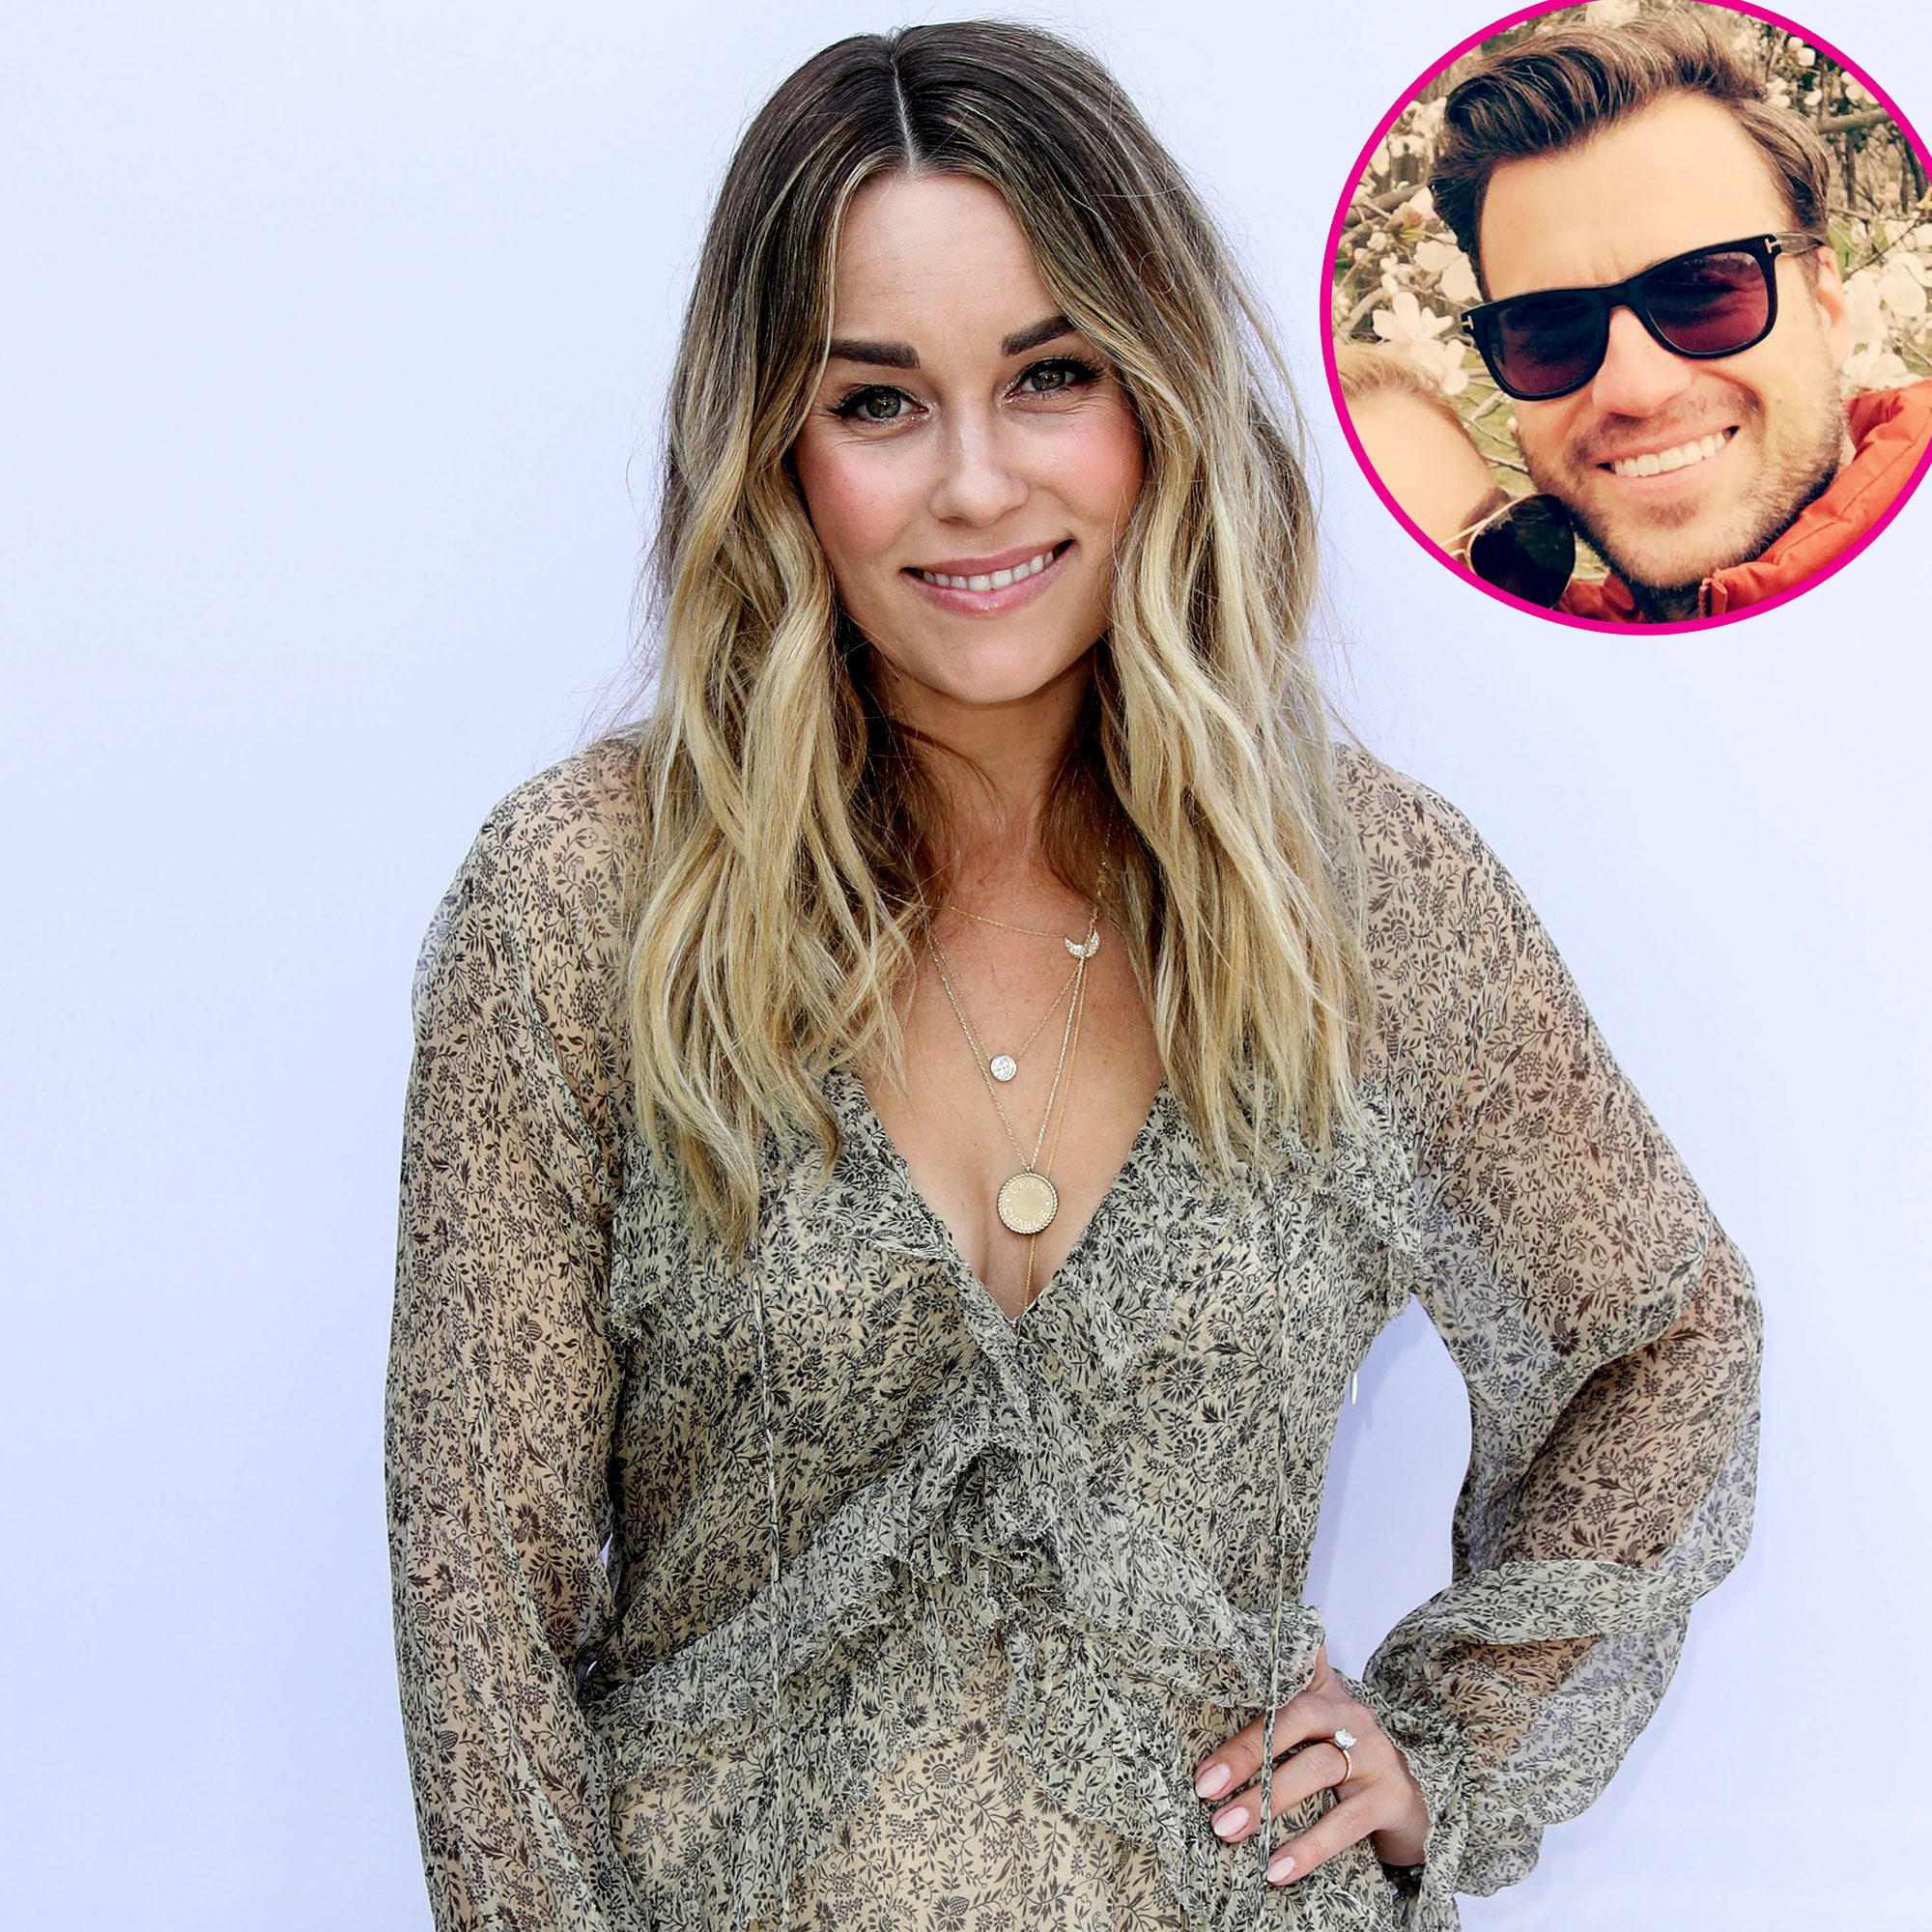 Lauren Conrad Reveals She, Husband William Tell Don't Want More